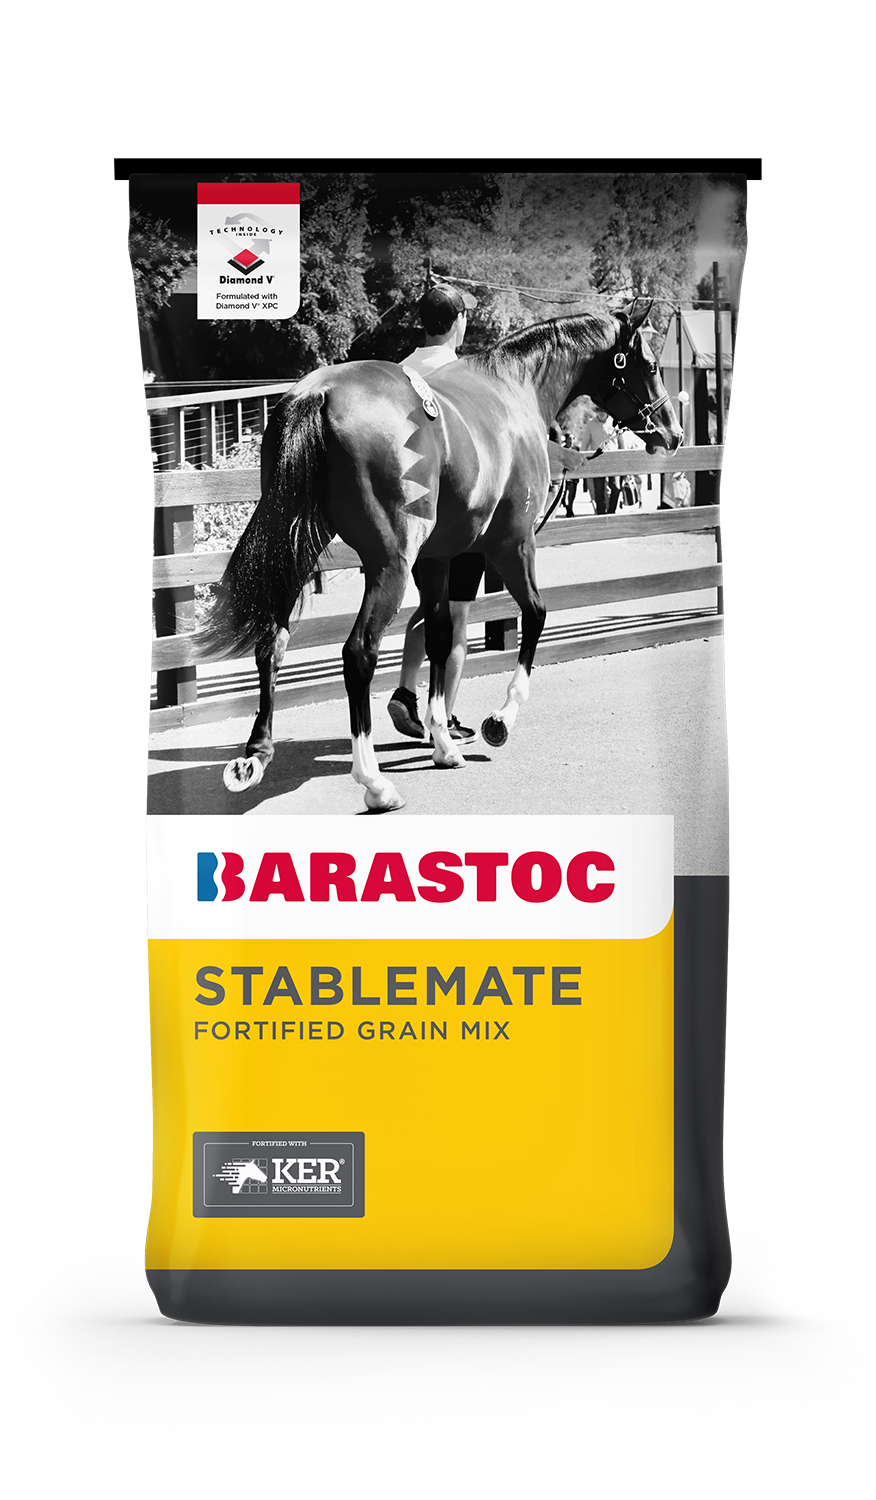 Stablemate